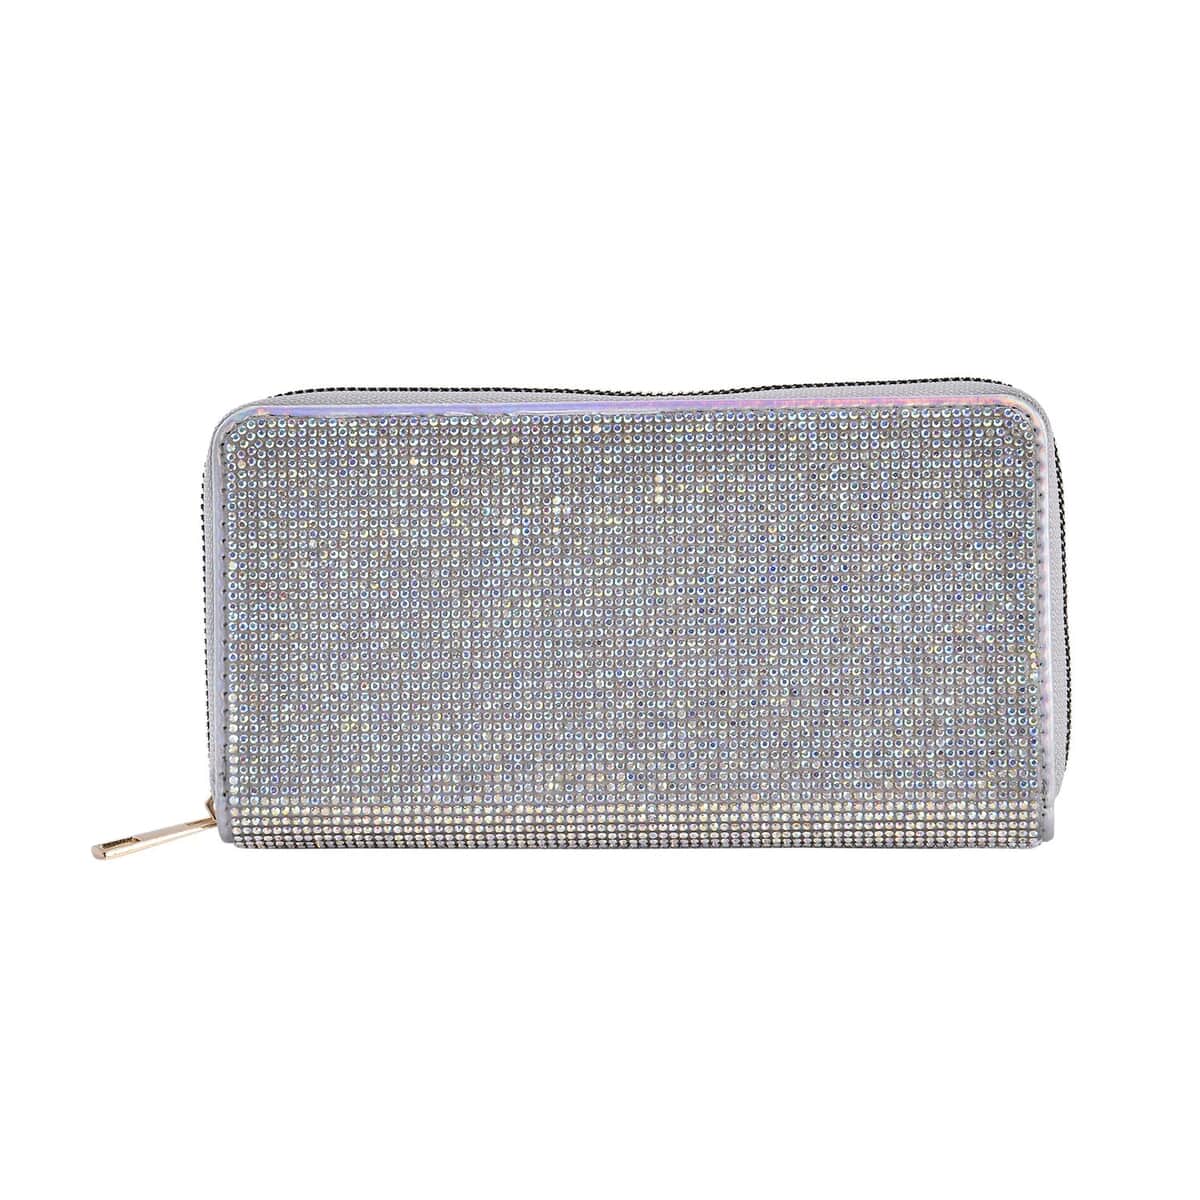 Aurora Borealis Color Sparkling Rhinestone and Faux Leather Wallet image number 0